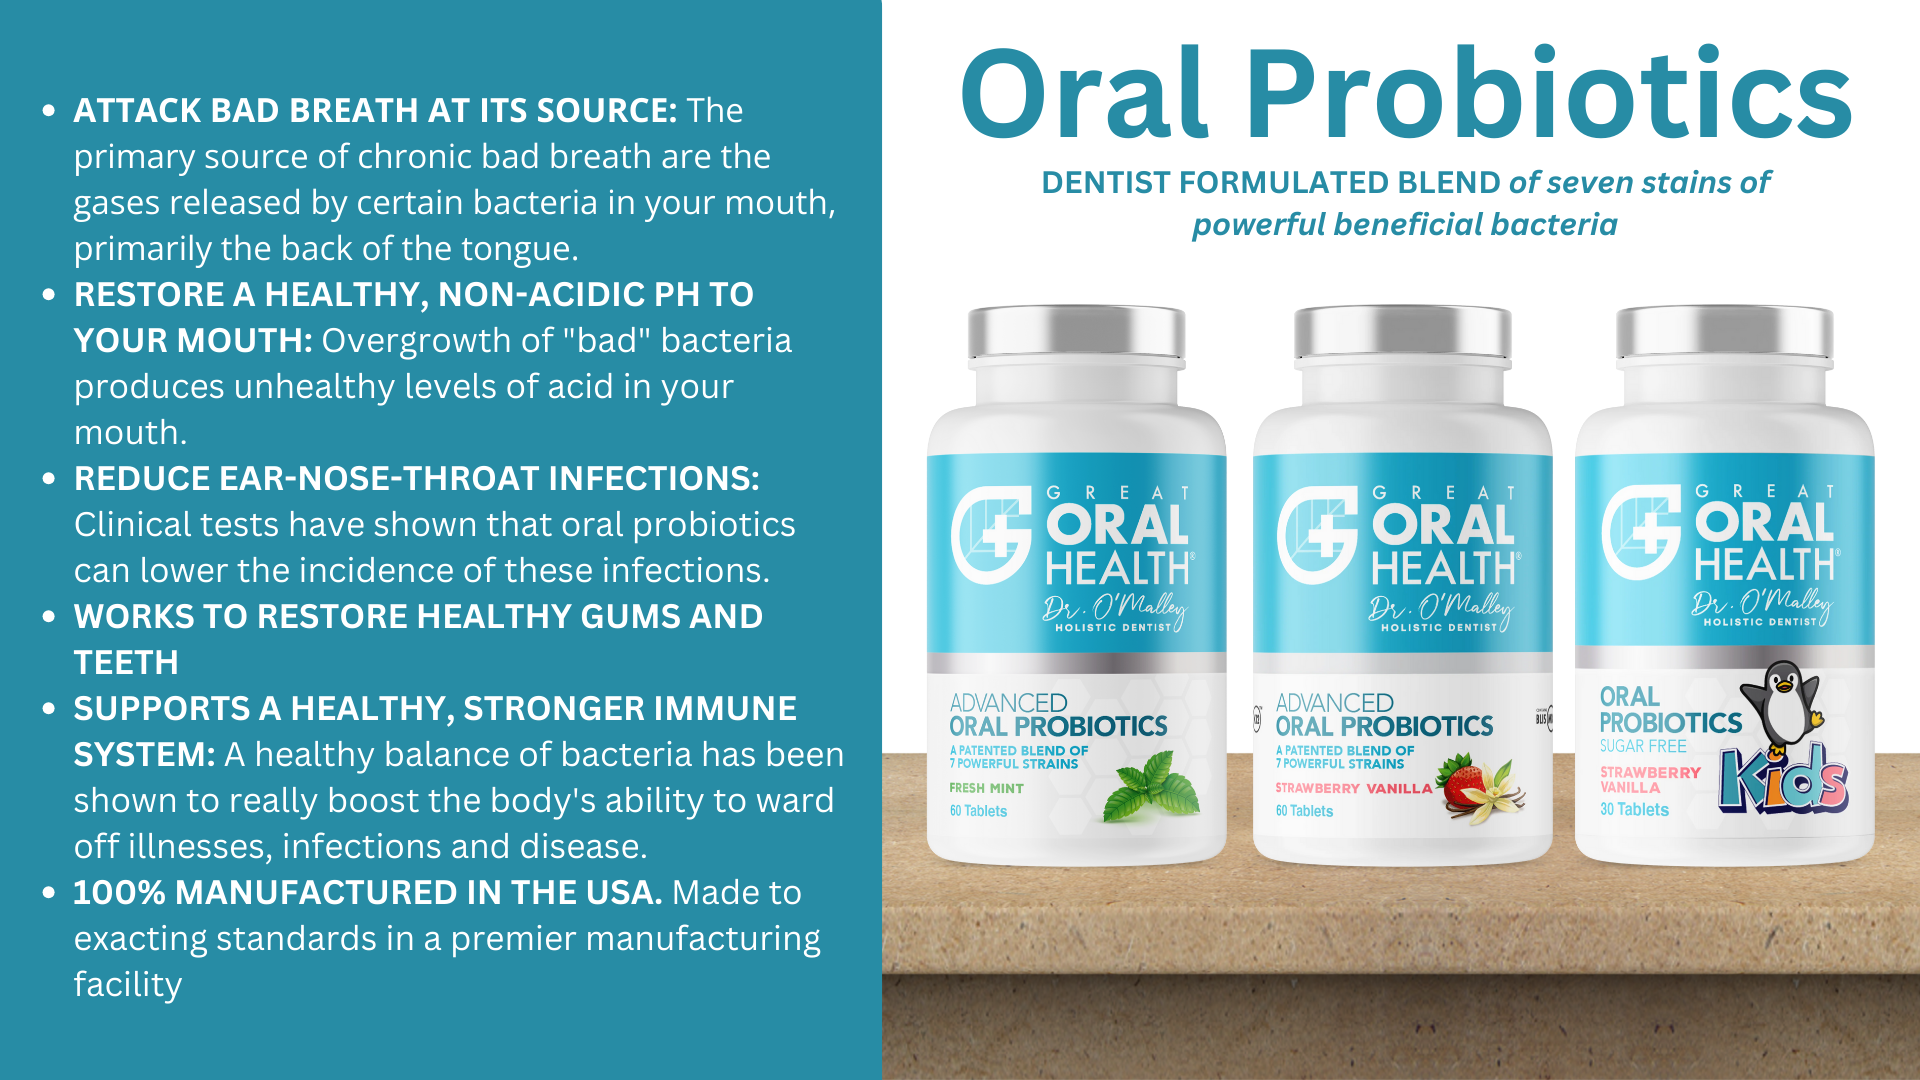 Oral Probiotic Products